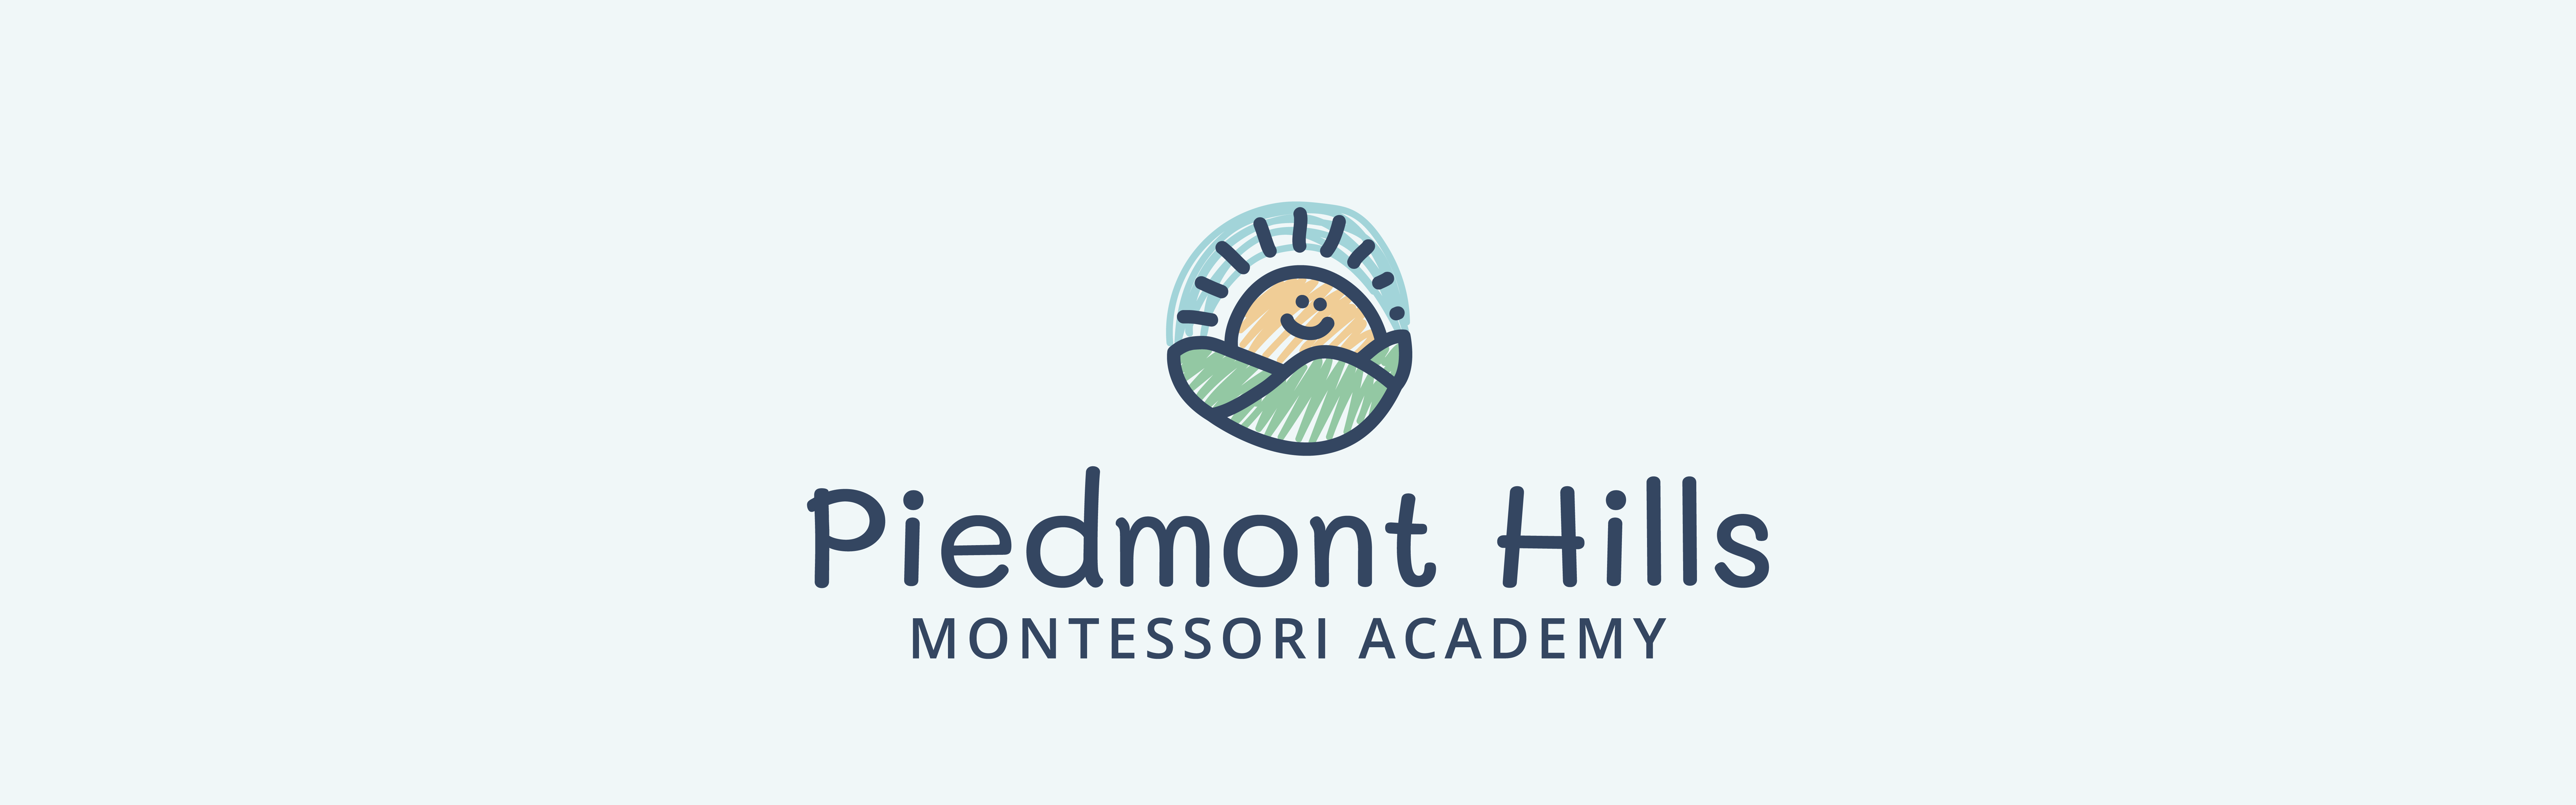 Logo of Piedmont Hills Montessori Academy featuring a stylized illustration of a smiling child wrapped in a blanket with sun rays behind, presented in a soft color palette.